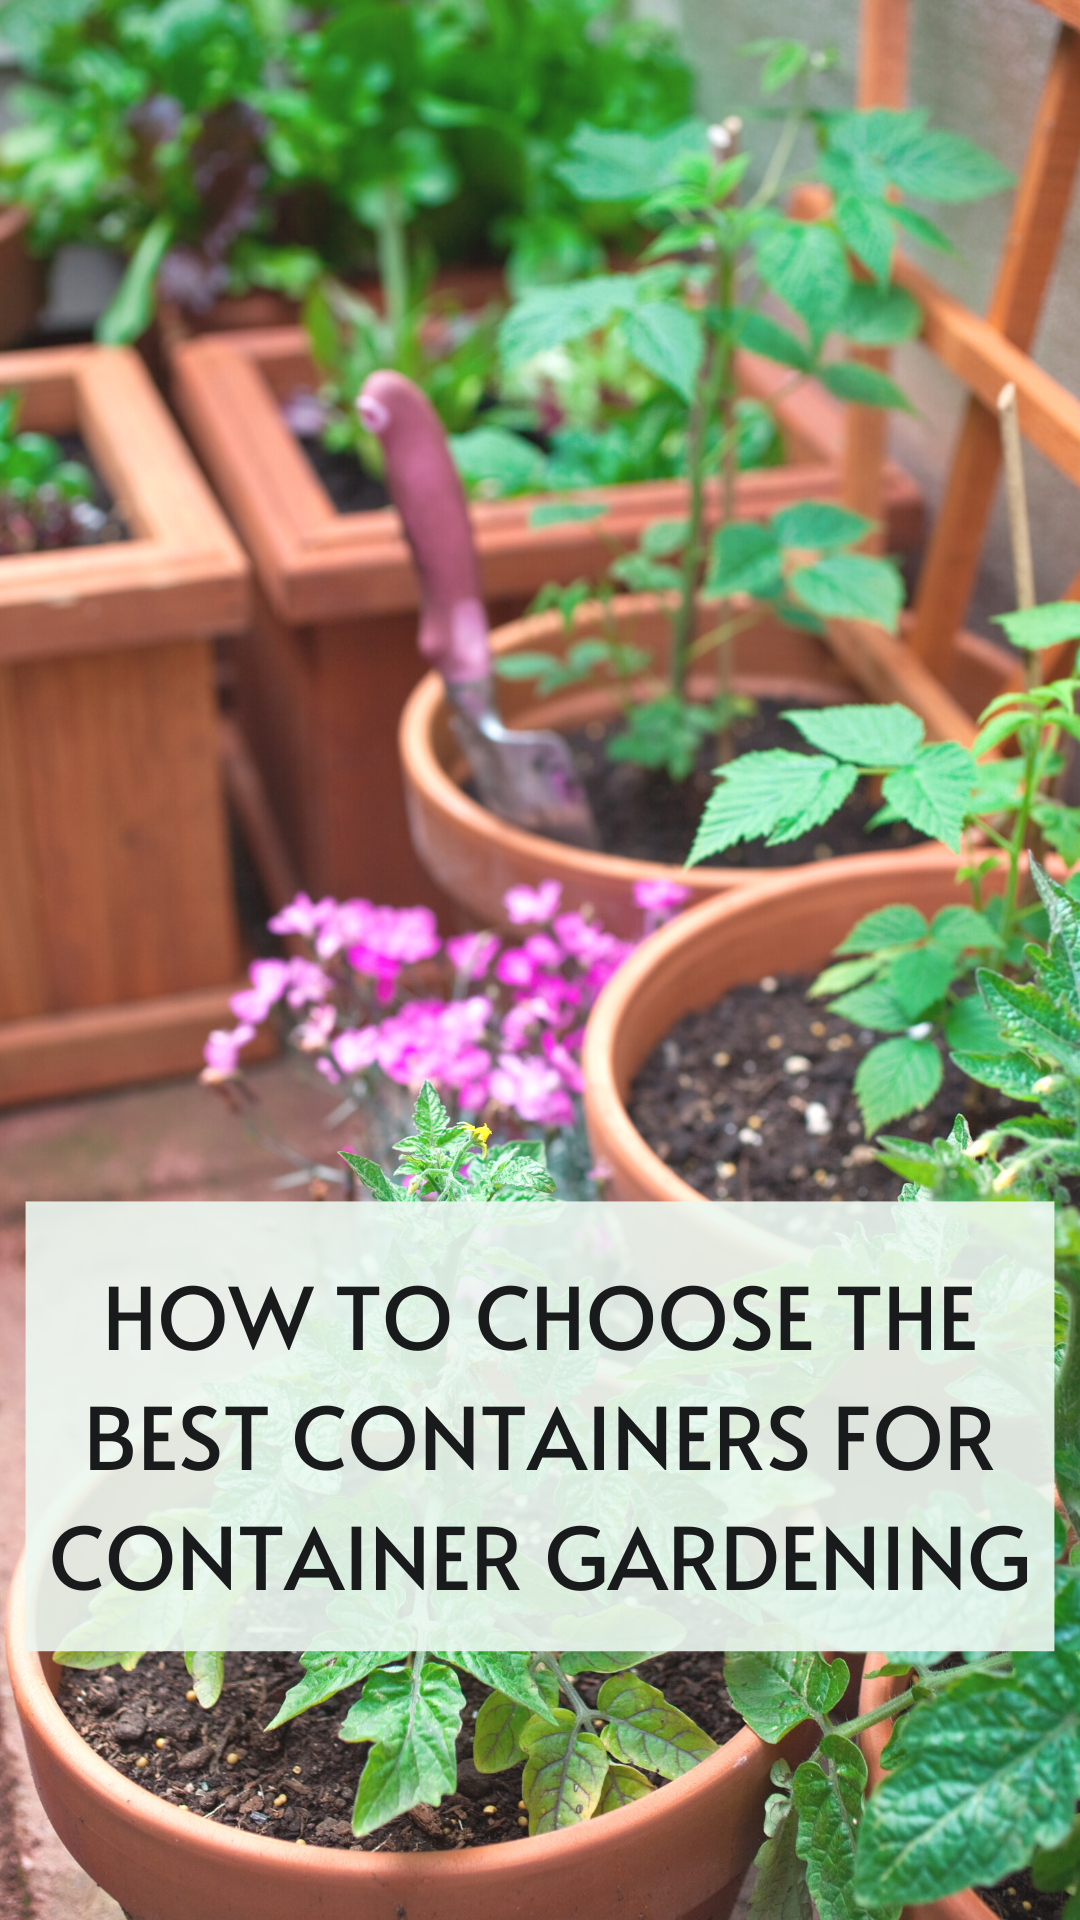 https://www.itsmeladyg.com/wp-content/uploads/2023/03/How-to-choose-the-best-containers-for-container-gardening.png